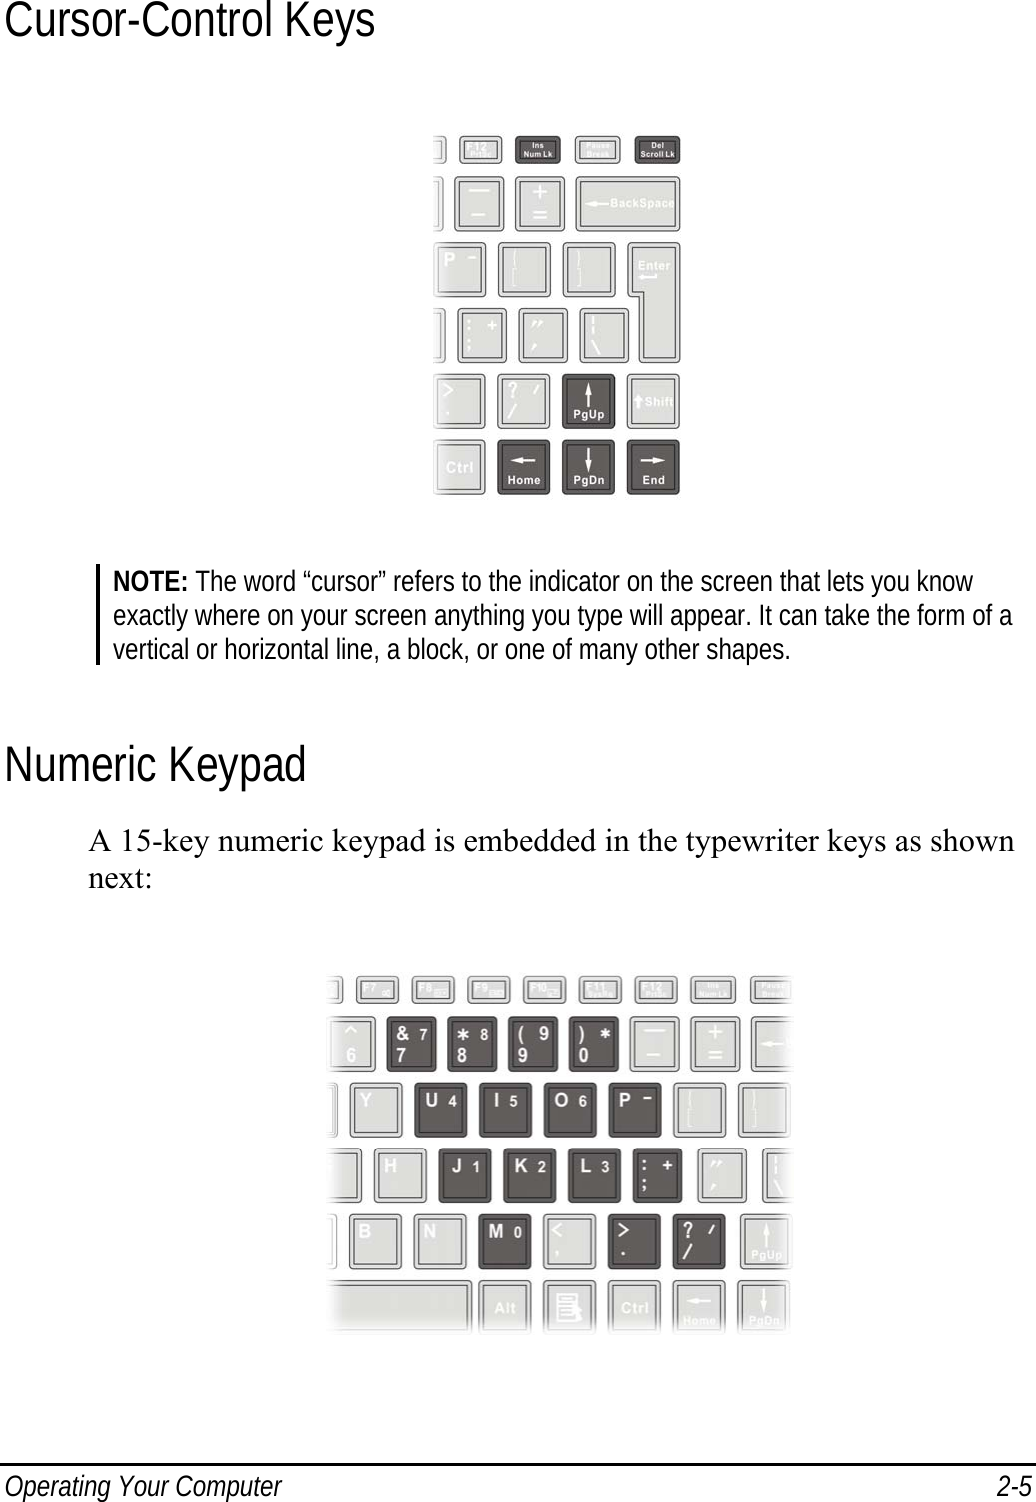  Operating Your Computer  2-5 Cursor-Control Keys  NOTE: The word “cursor” refers to the indicator on the screen that lets you know exactly where on your screen anything you type will appear. It can take the form of a vertical or horizontal line, a block, or one of many other shapes.  Numeric Keypad A 15-key numeric keypad is embedded in the typewriter keys as shown next:  